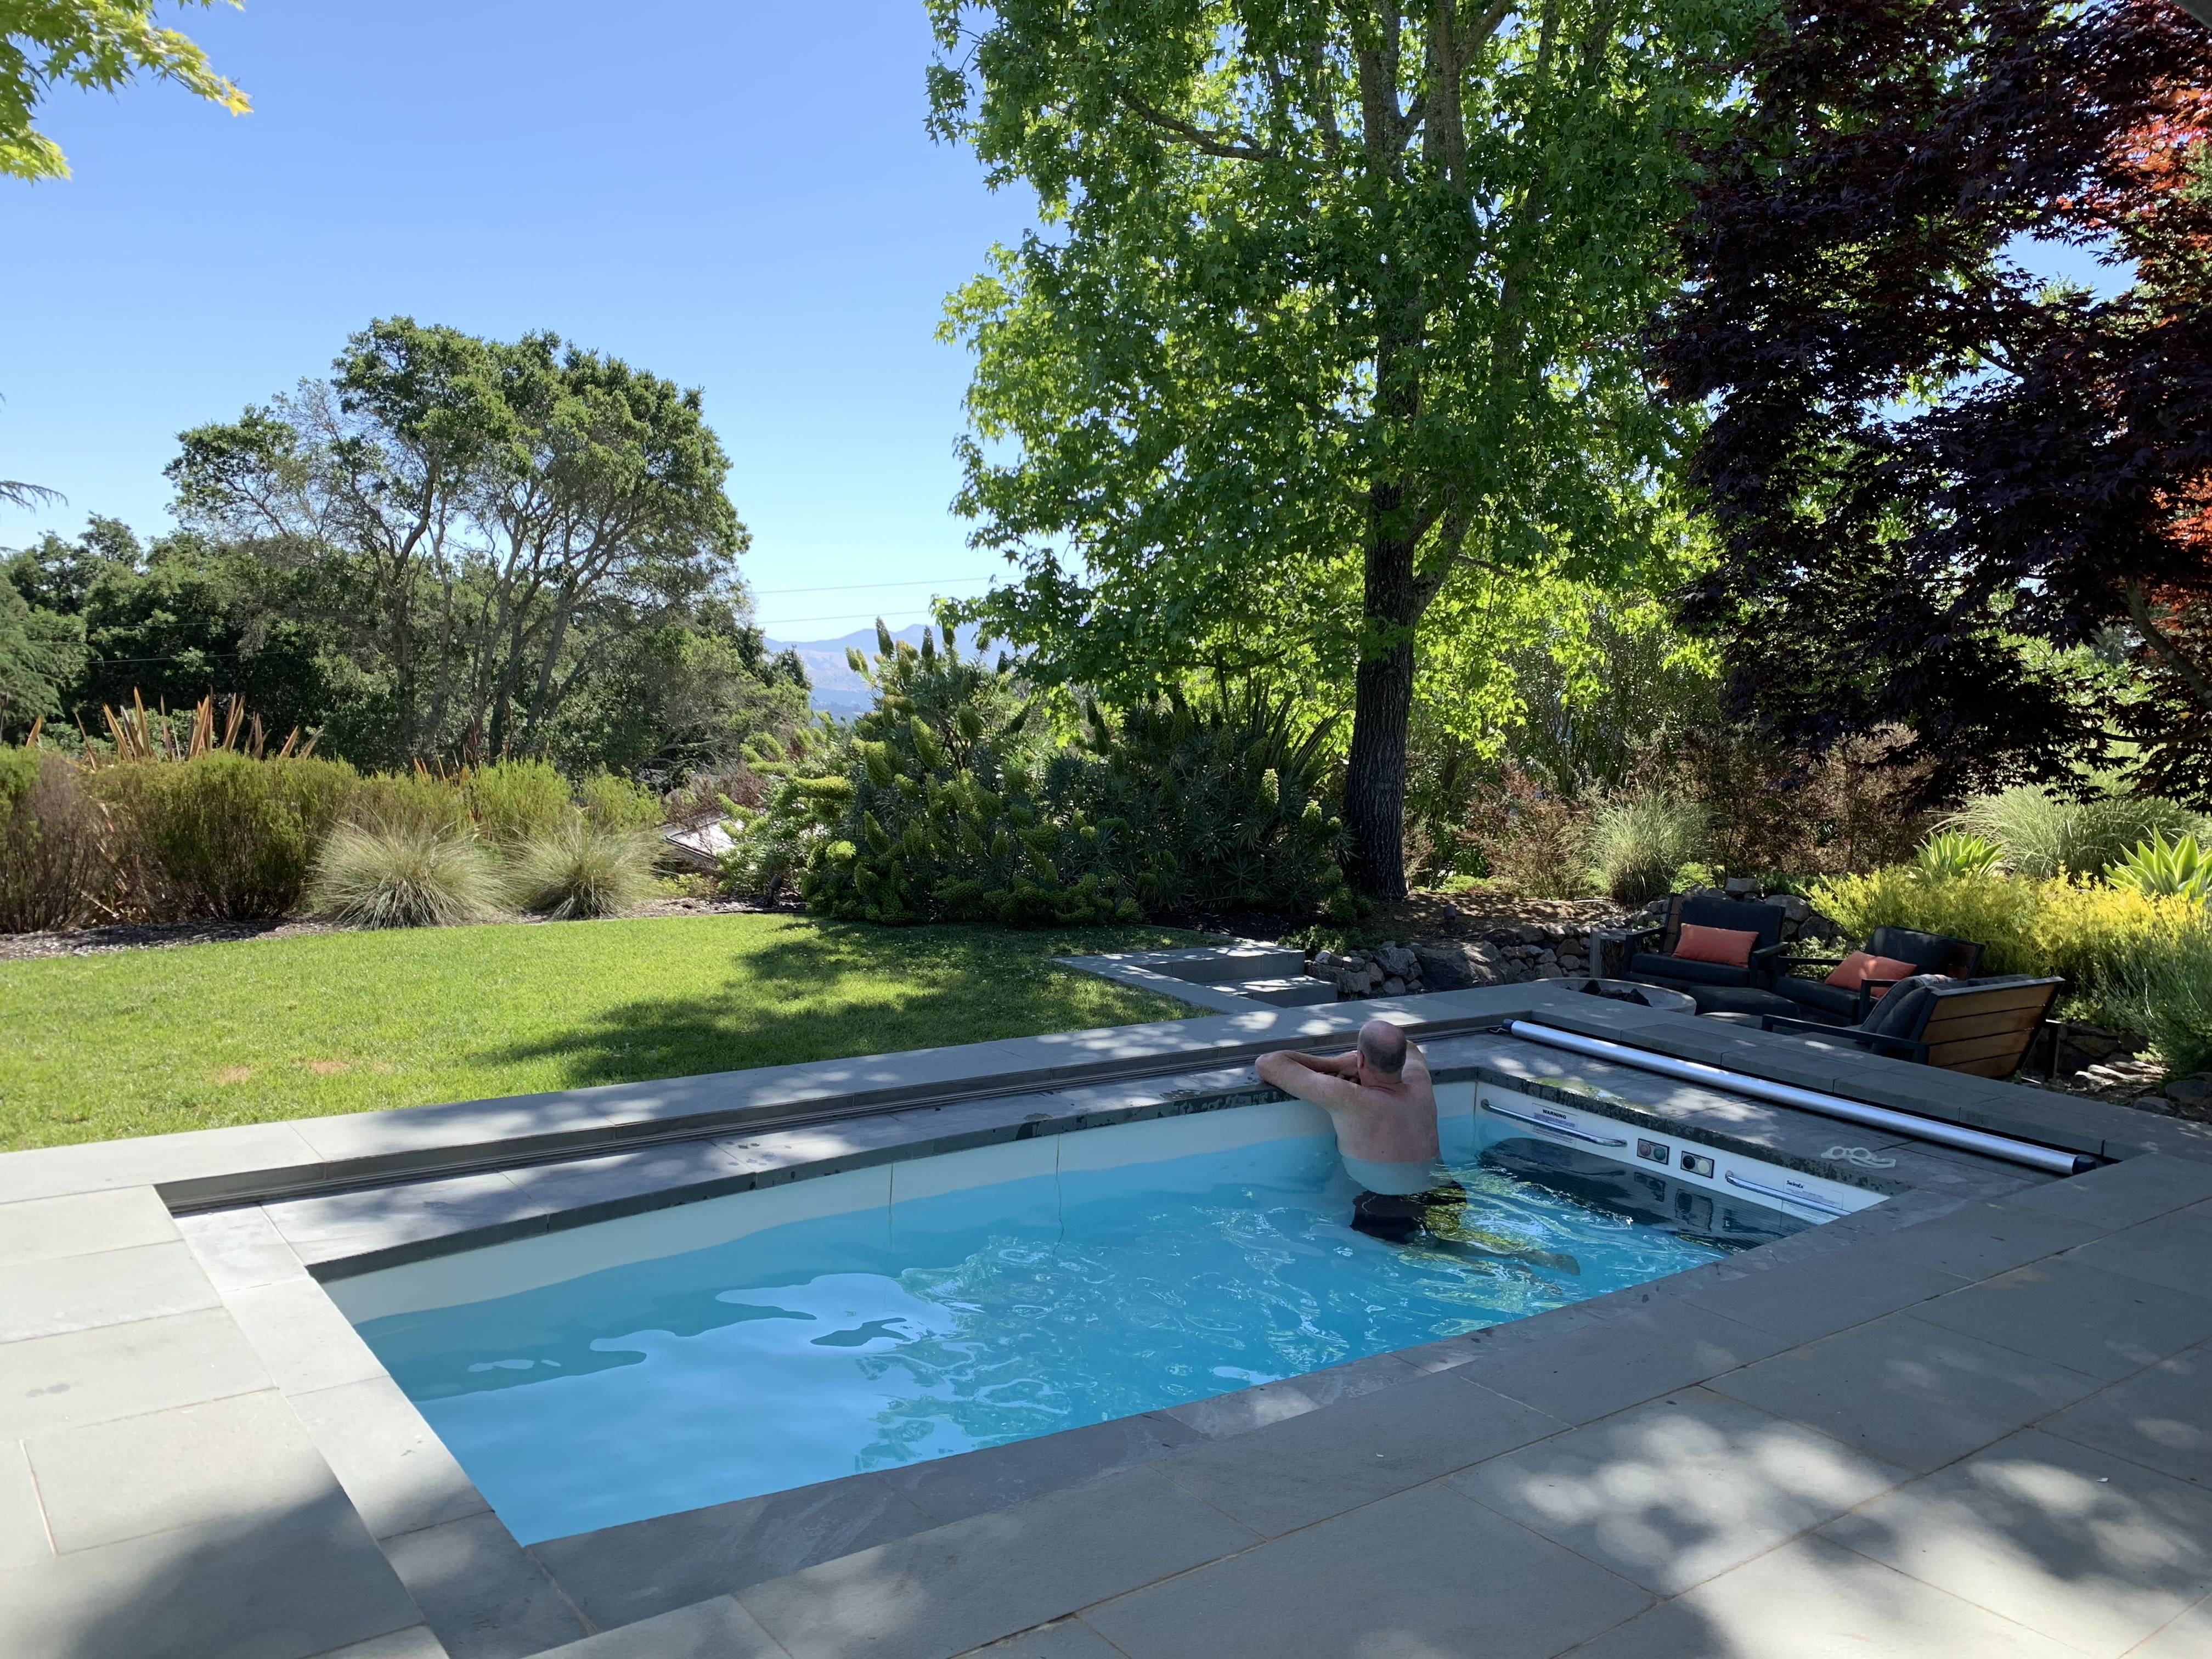 Creative Small Pool Designs For Small Backyards for Large Space